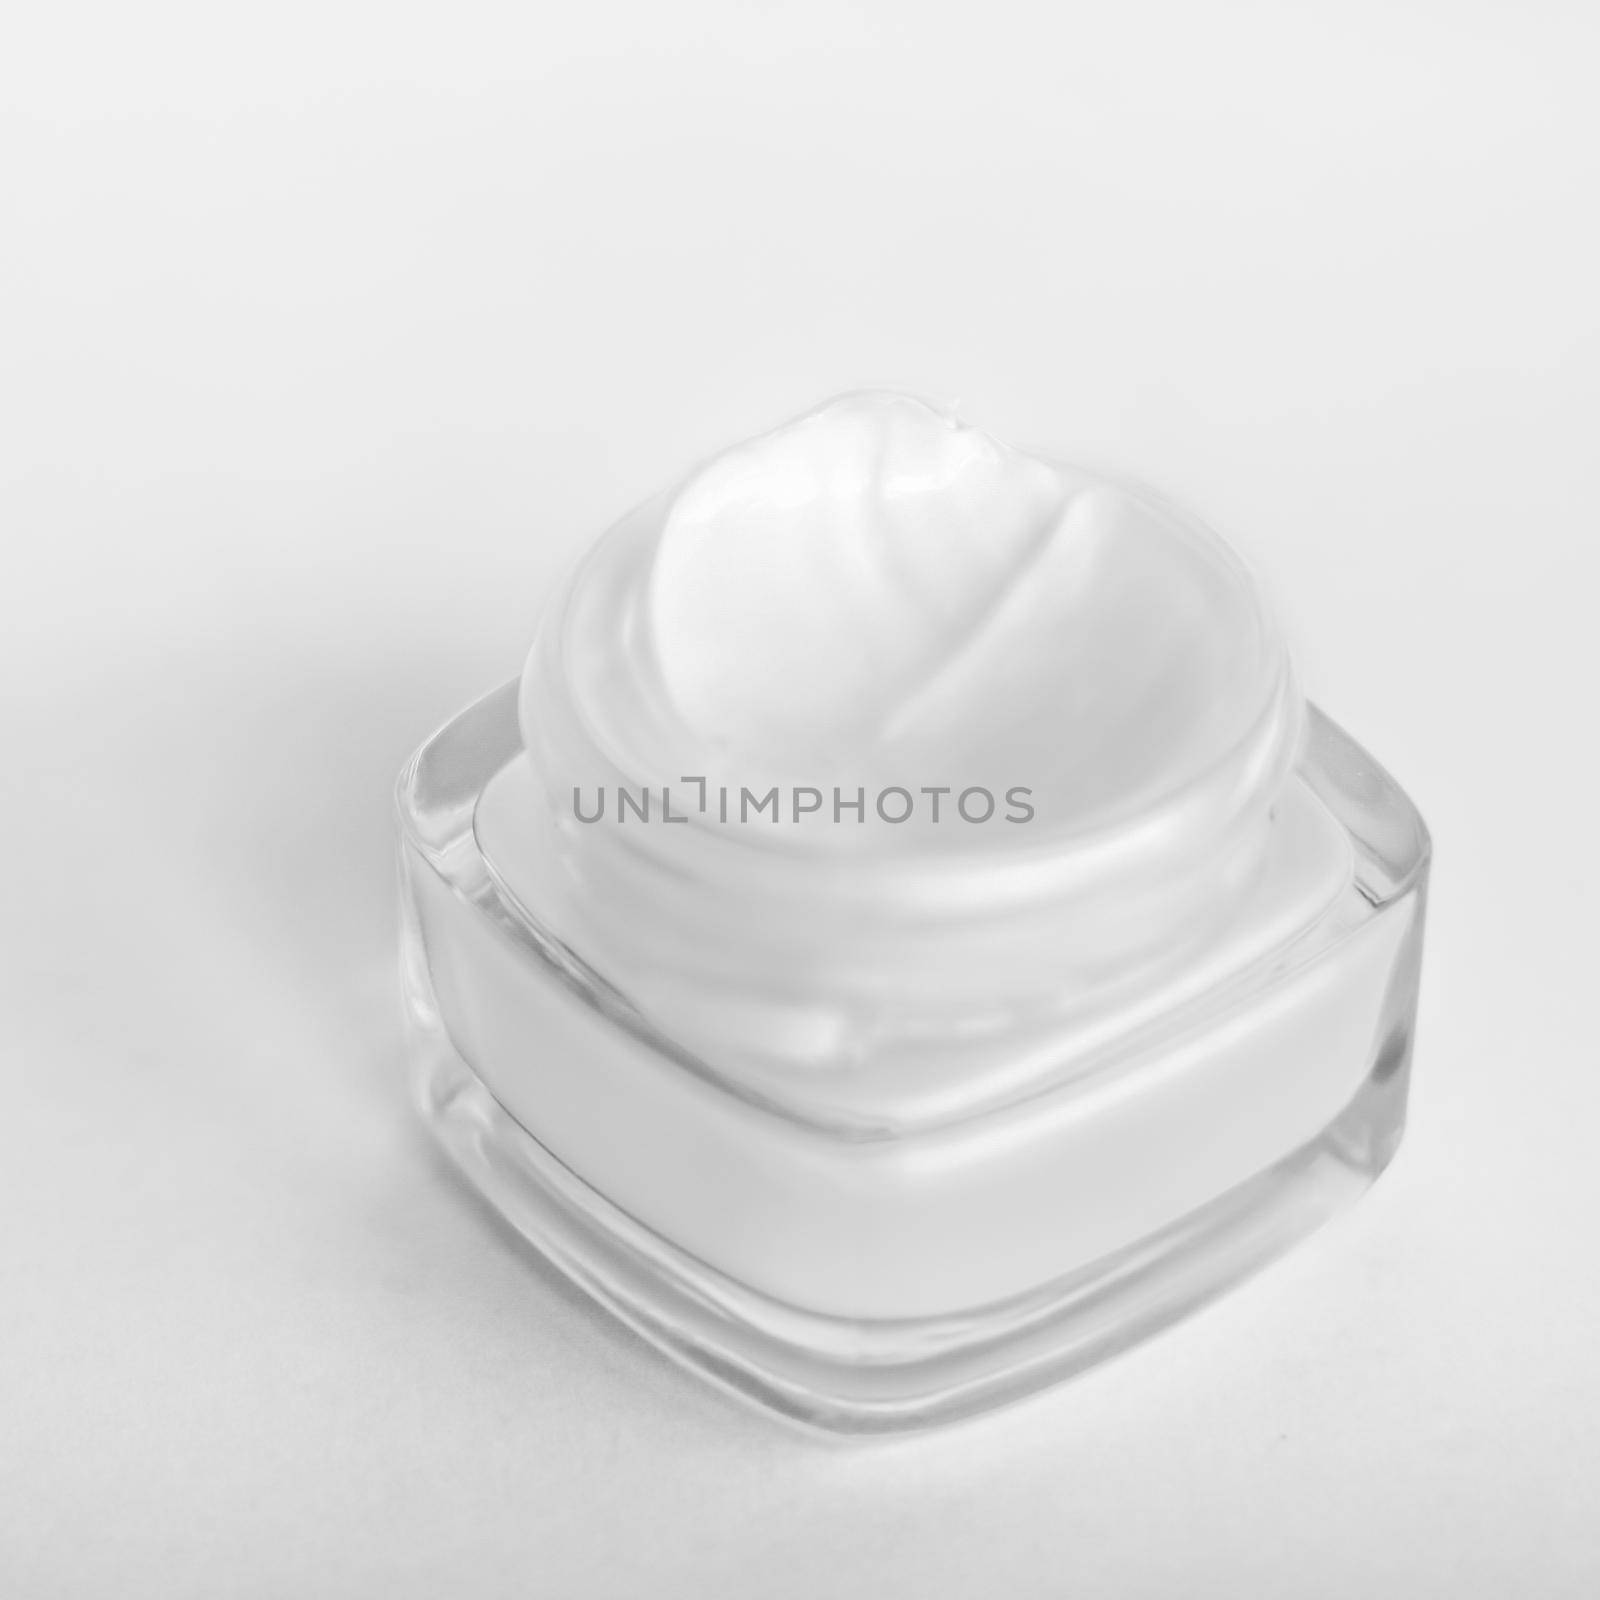 Cosmetic branding, toiletries and spf concept - Face cream moisturizer jar on white background, moisturizing skin care lotion and lifting emulsion, anti-age cosmetics for luxury beauty skincare brand